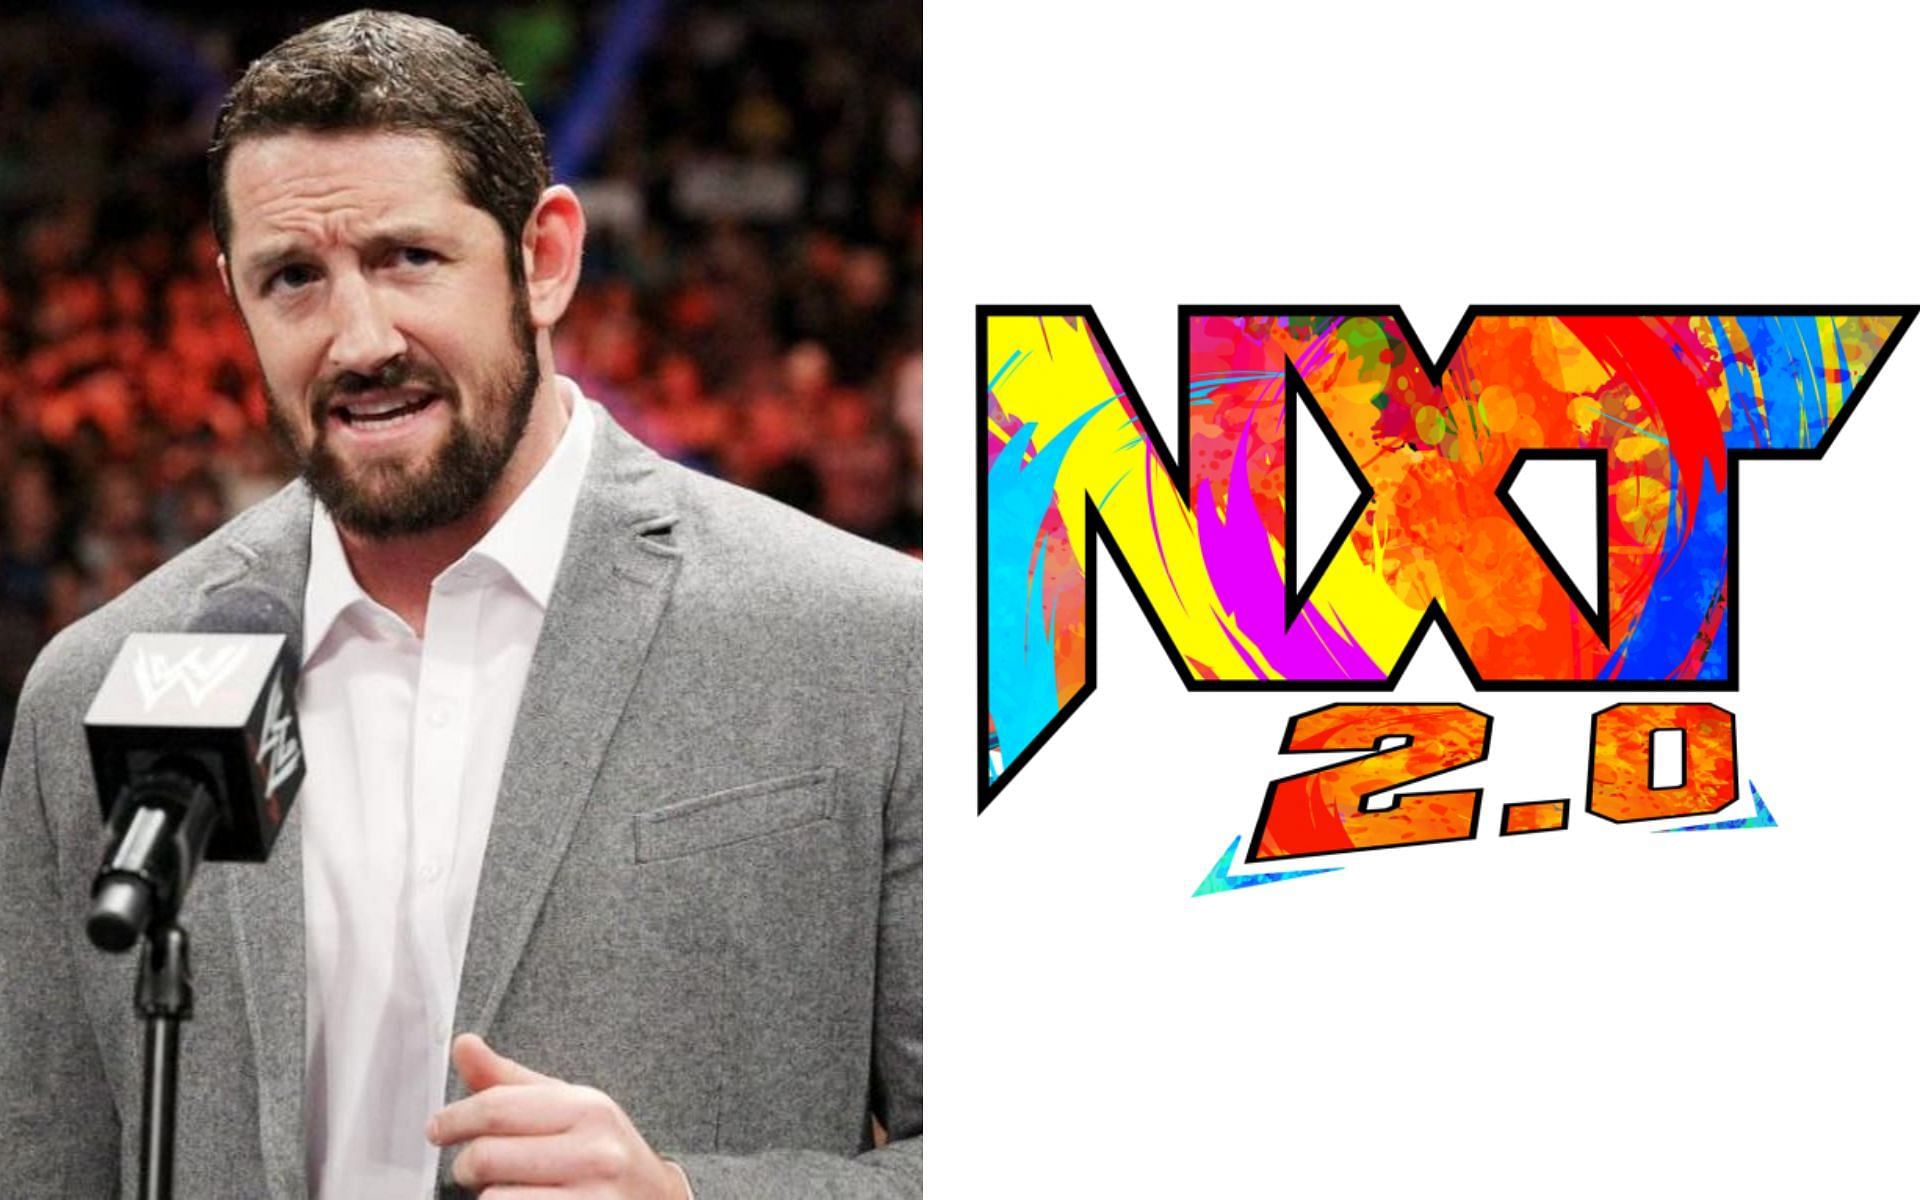 Wade Barrett has been working as a commentator for the developmental brand since August 2020